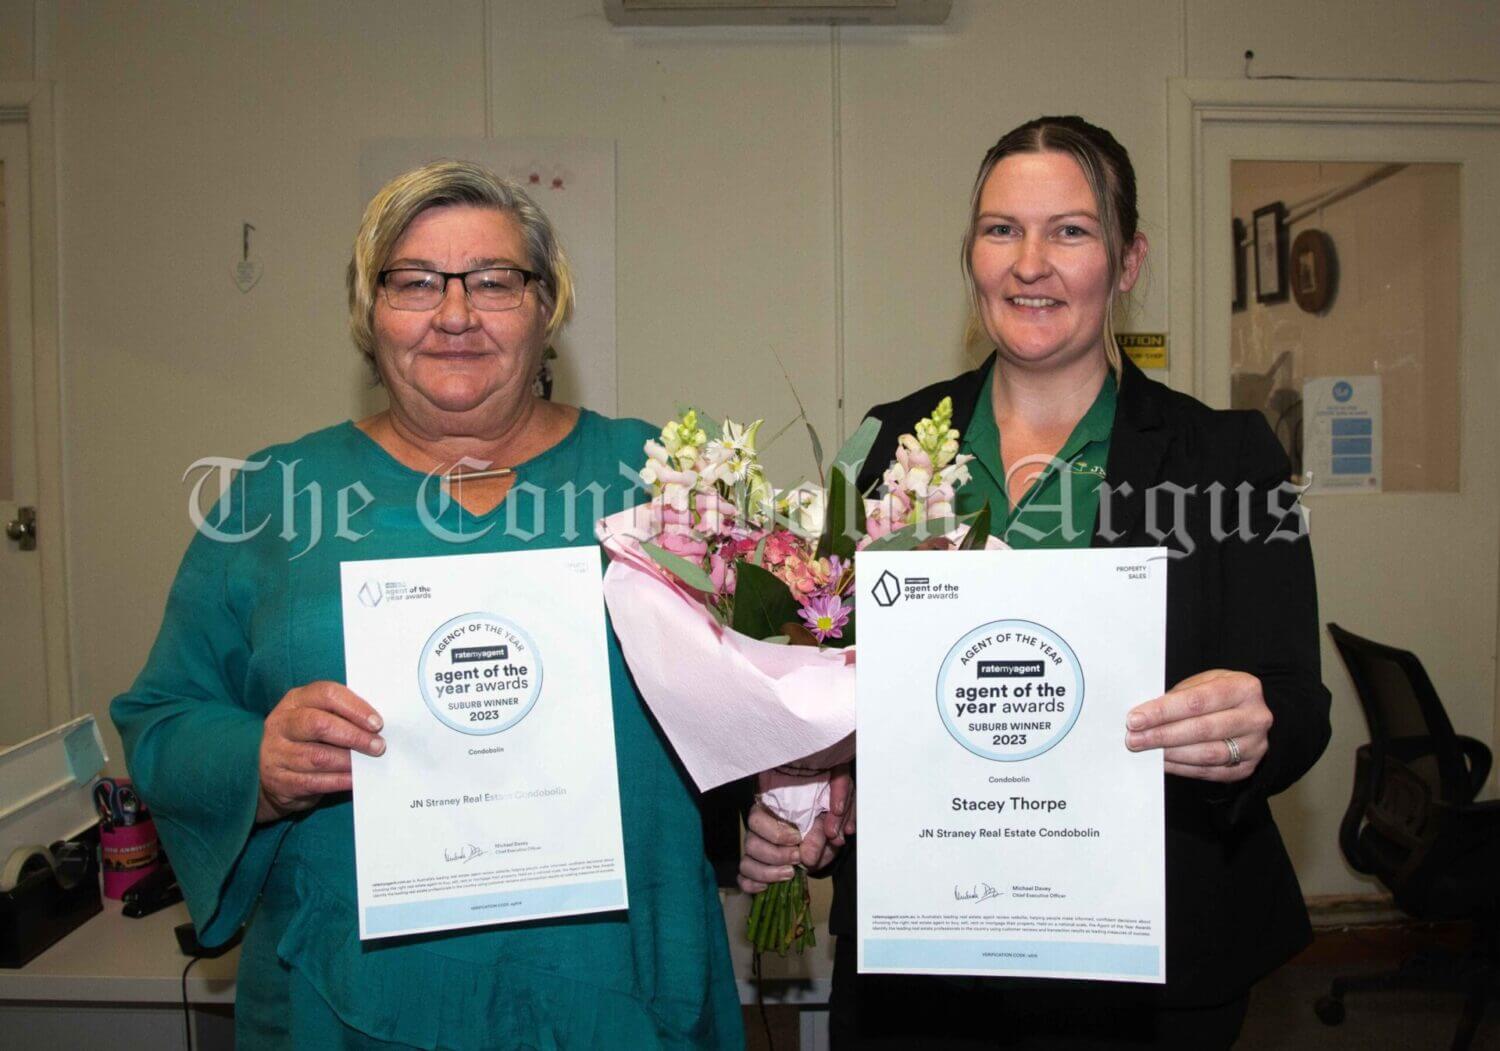 Stacey Thorpe (right) was named the Number One agent in Condobolin, as the suburb winner, based on verified reviews from each property sale in the RateMyAgent Agent of the Year Awards. The JN Straney Agency was also named the suburb winner as the Number One Agency in Condobolin. Kelle Mooney (left) showcases the Agency’s Award. Image Credit: Kathy Parnaby.